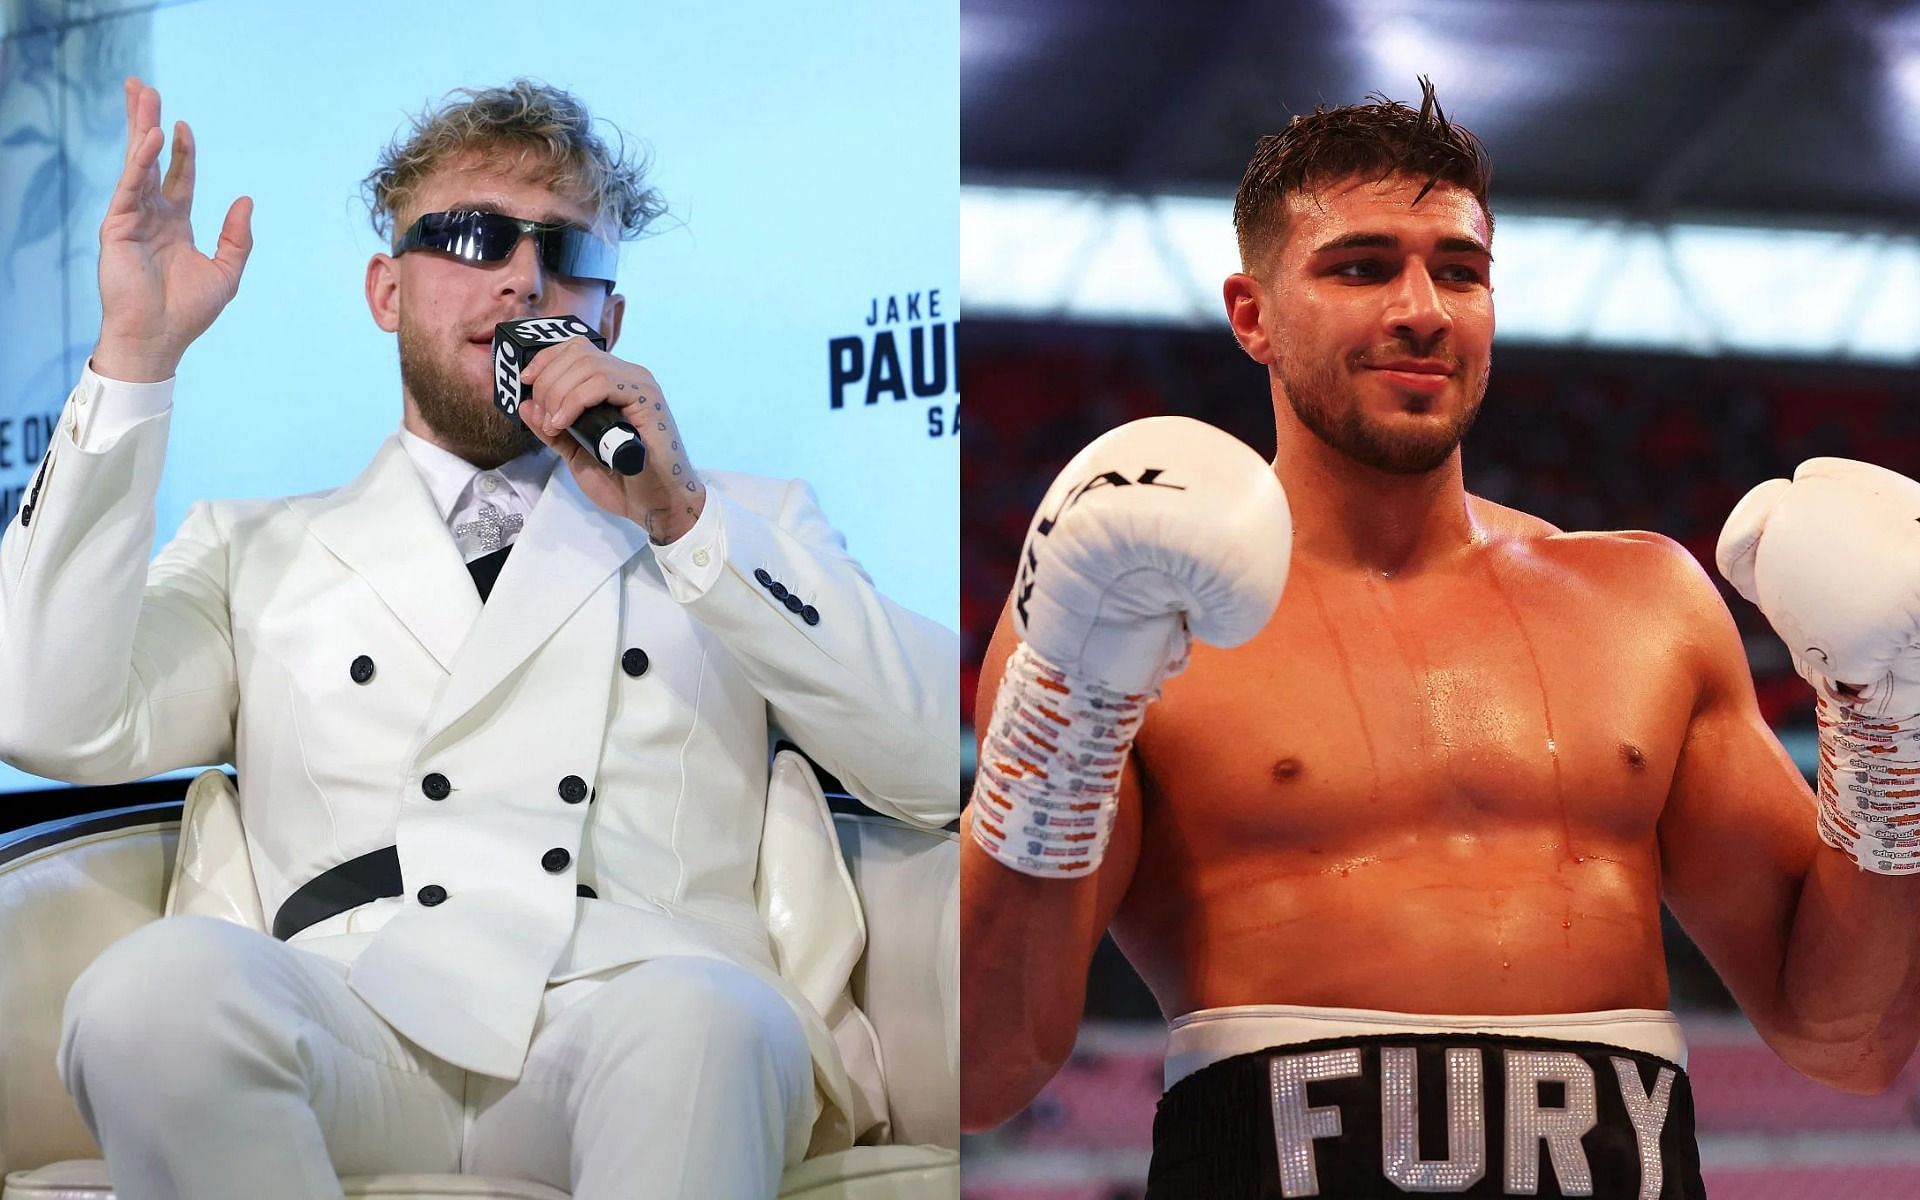 Jake Paul (L) has responded to Tommy Fury (R) calling him out.